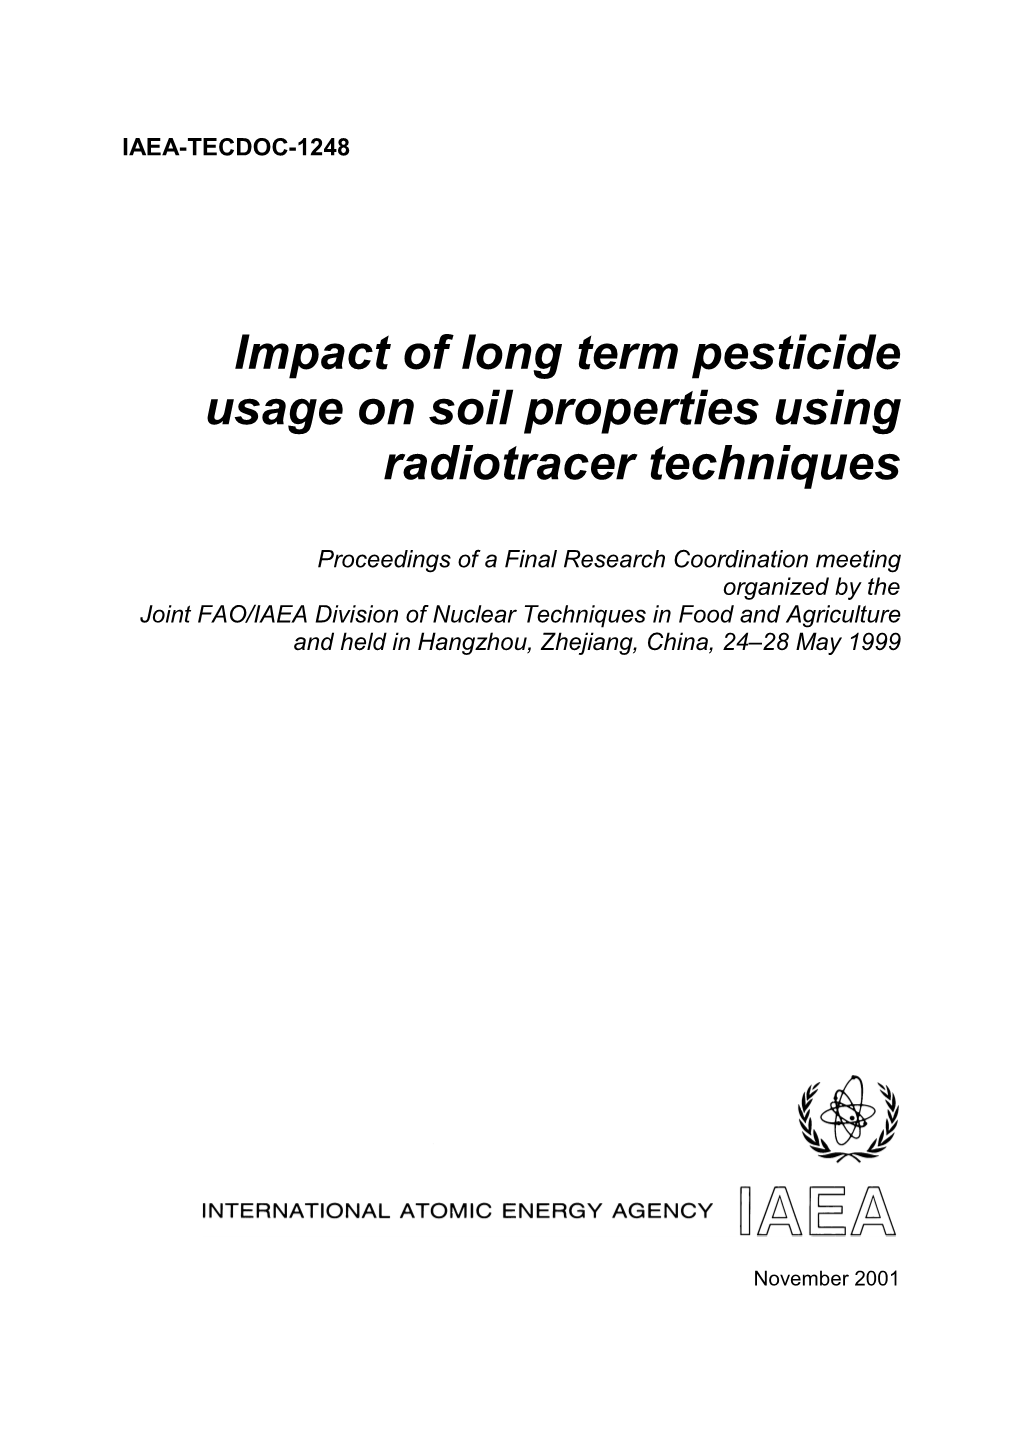 Impact of Long Term Pesticide Usage on Soil Properties Using Radiotracer Techniques